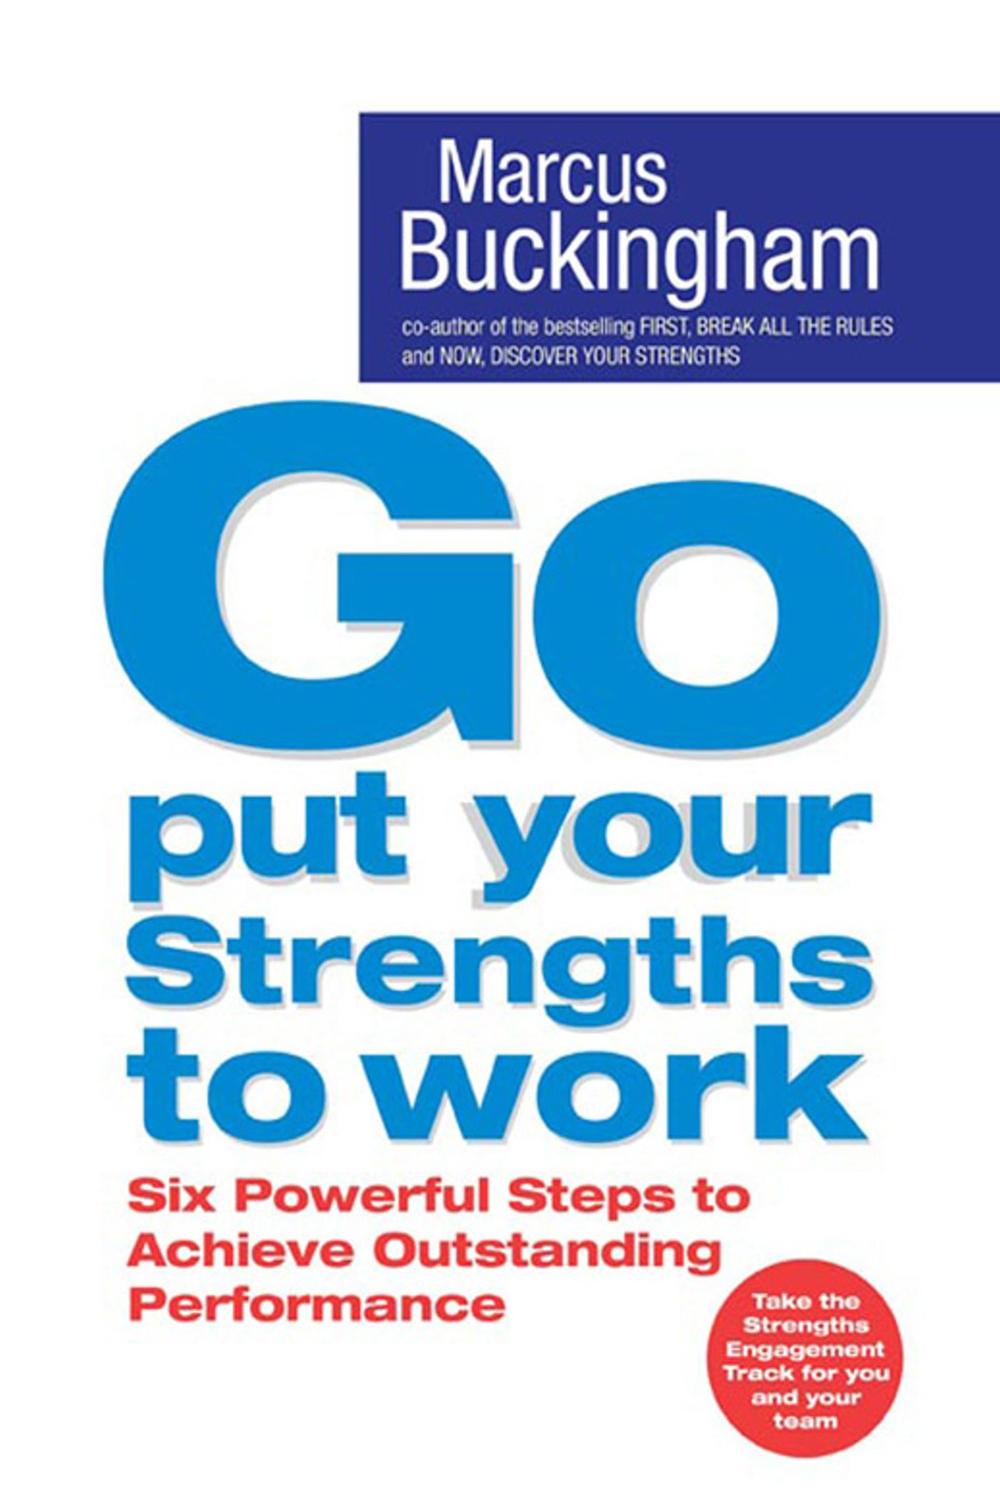 Go put your strengths to work pdf free download mhdd download windows 10